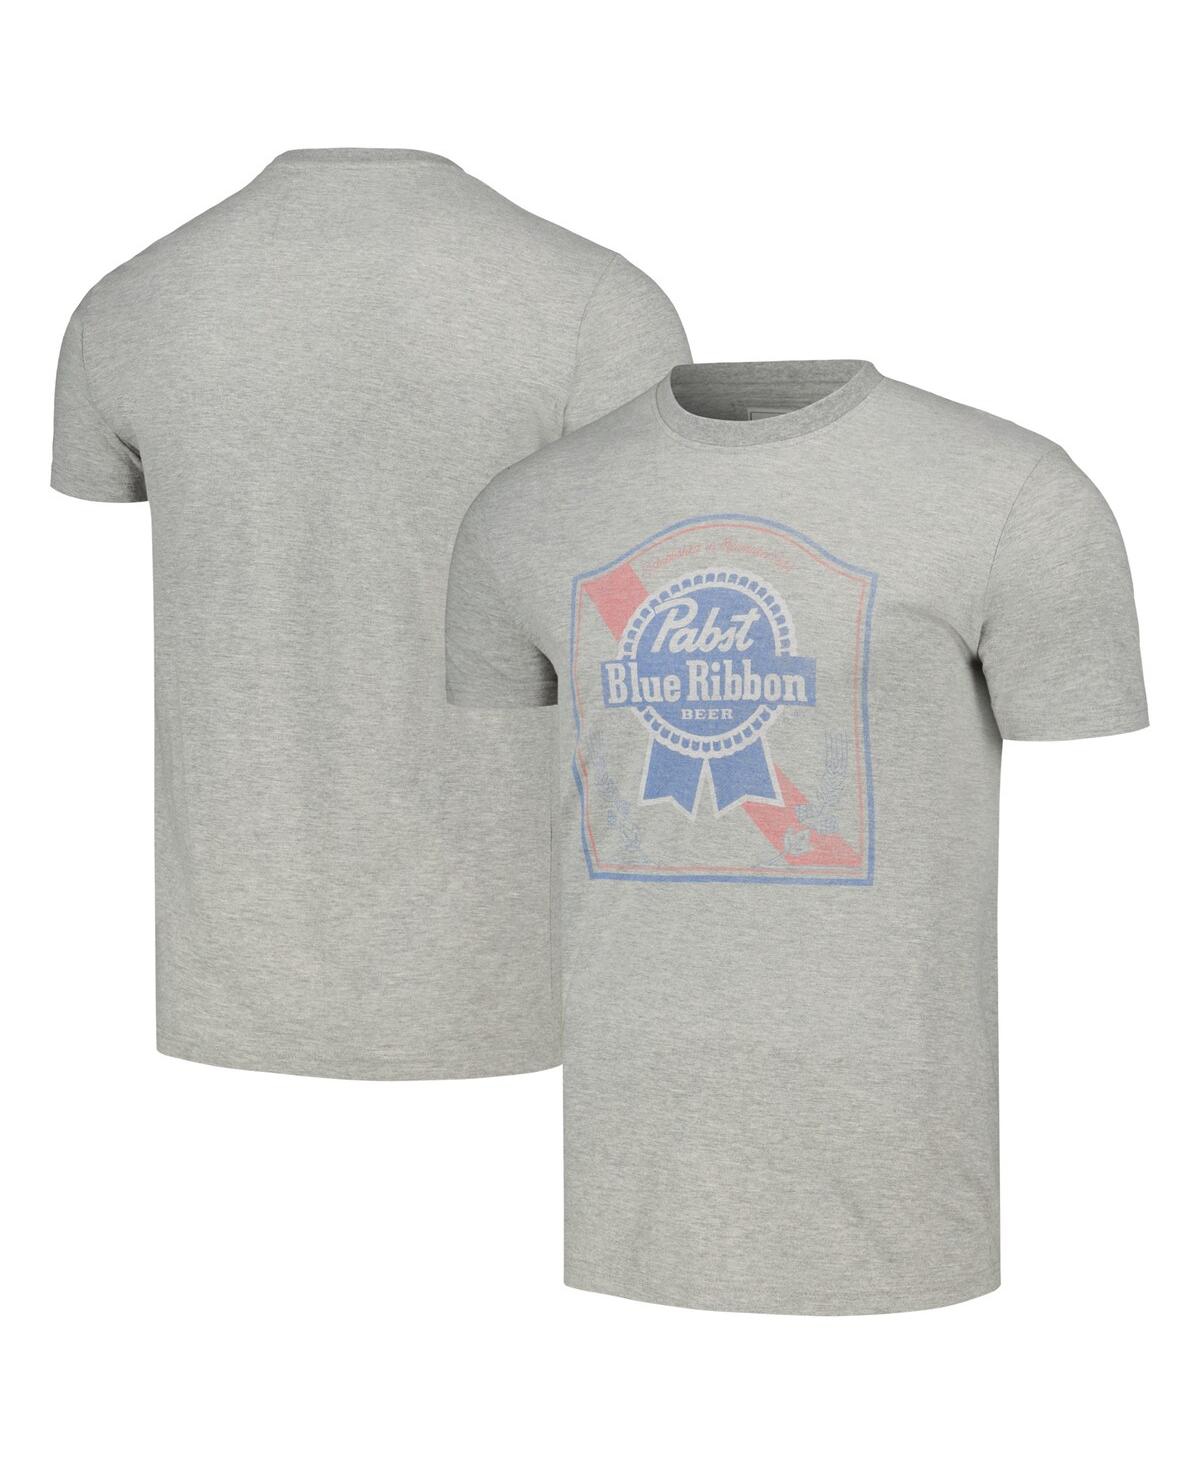 Men's American Needle Heather Gray Distressed Pabst Blue Ribbon Vintage-Like Fade T-shirt - Heather Gray